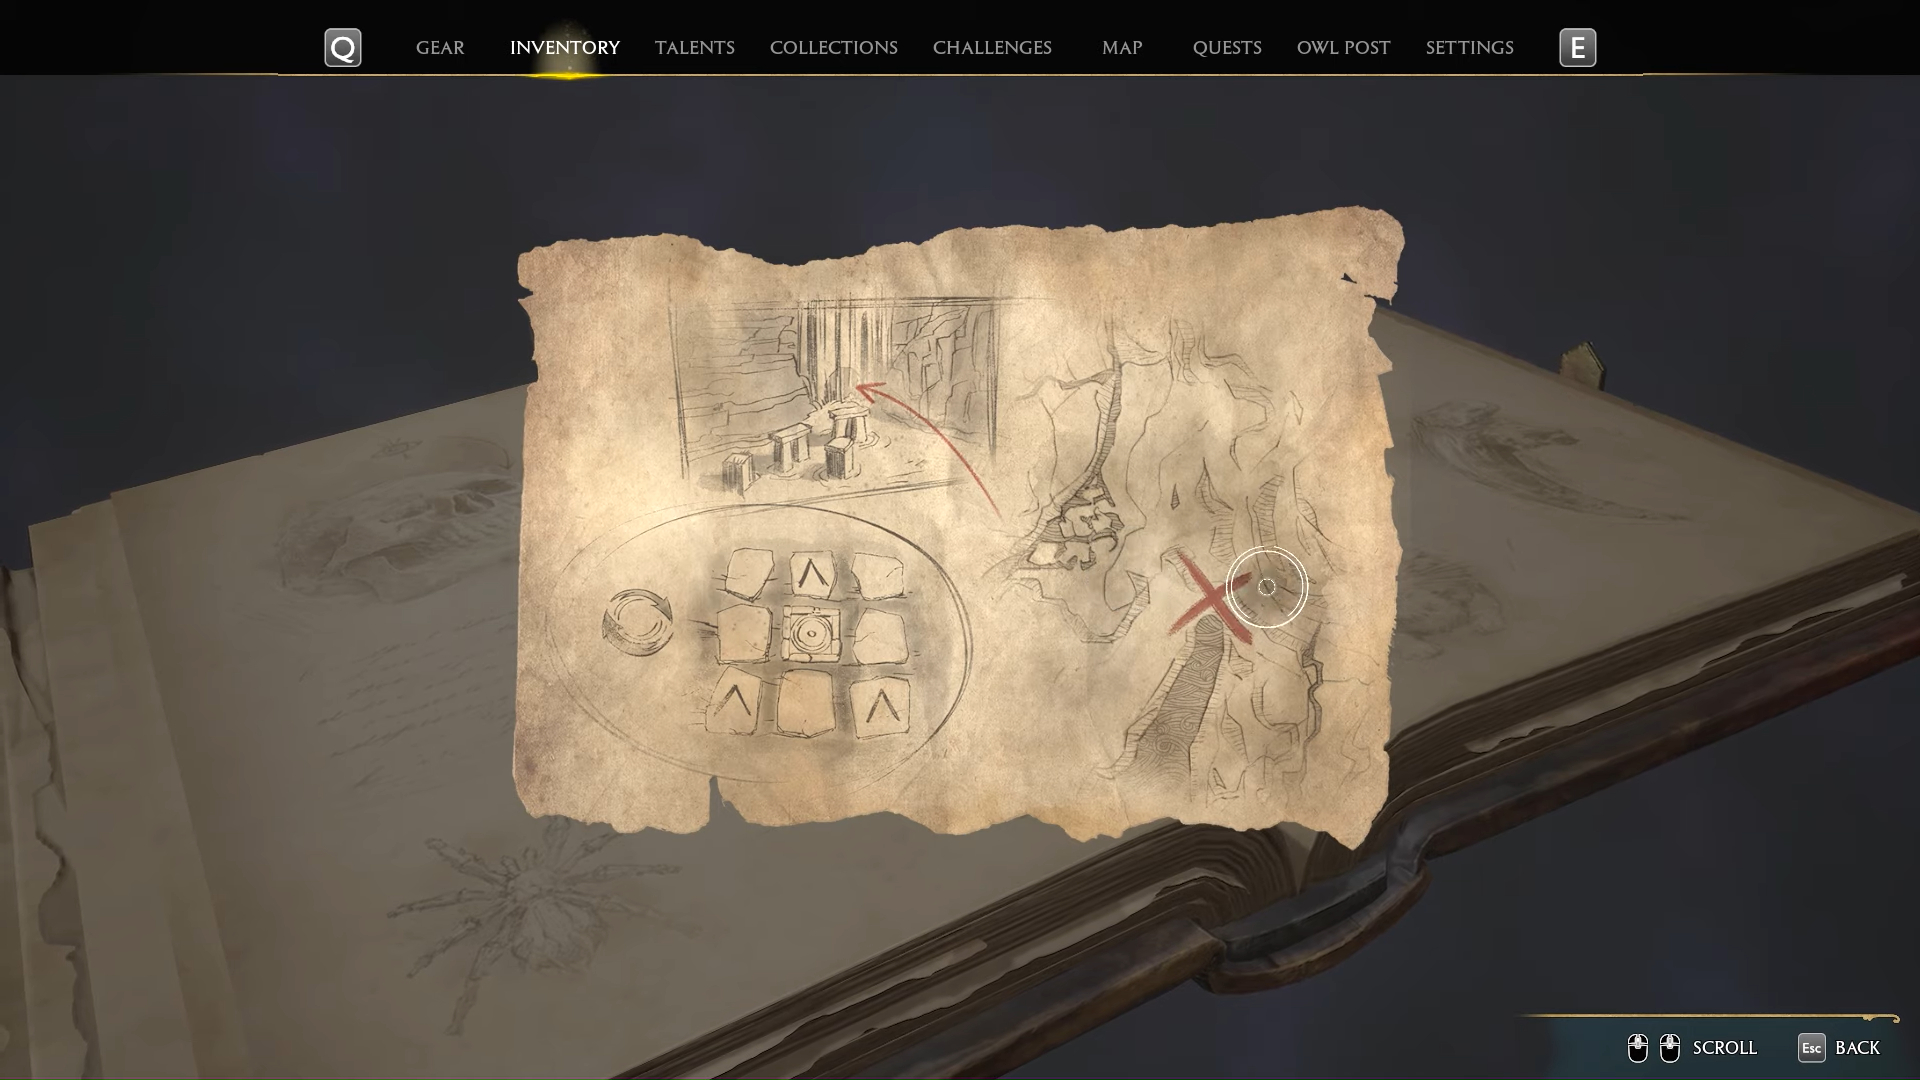 A map fragment with a clue to a puzzle.